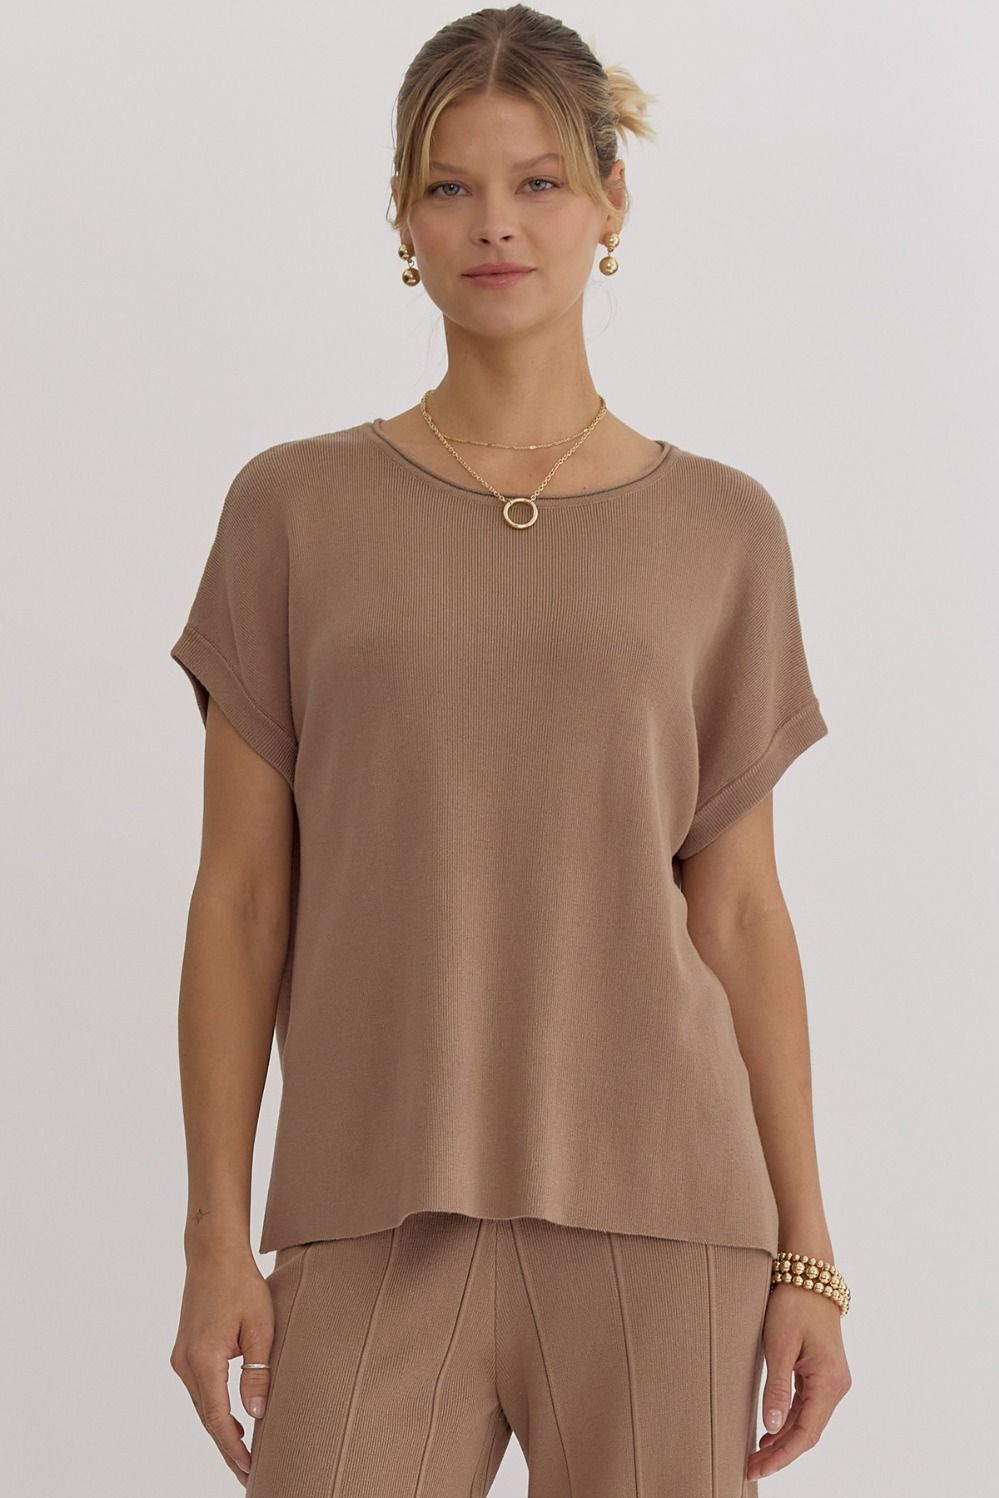 ENTRO INC Women's Top MOCHA / S Solid Ribbed Round Neck Short Sleeve Top || David's Clothing T24219